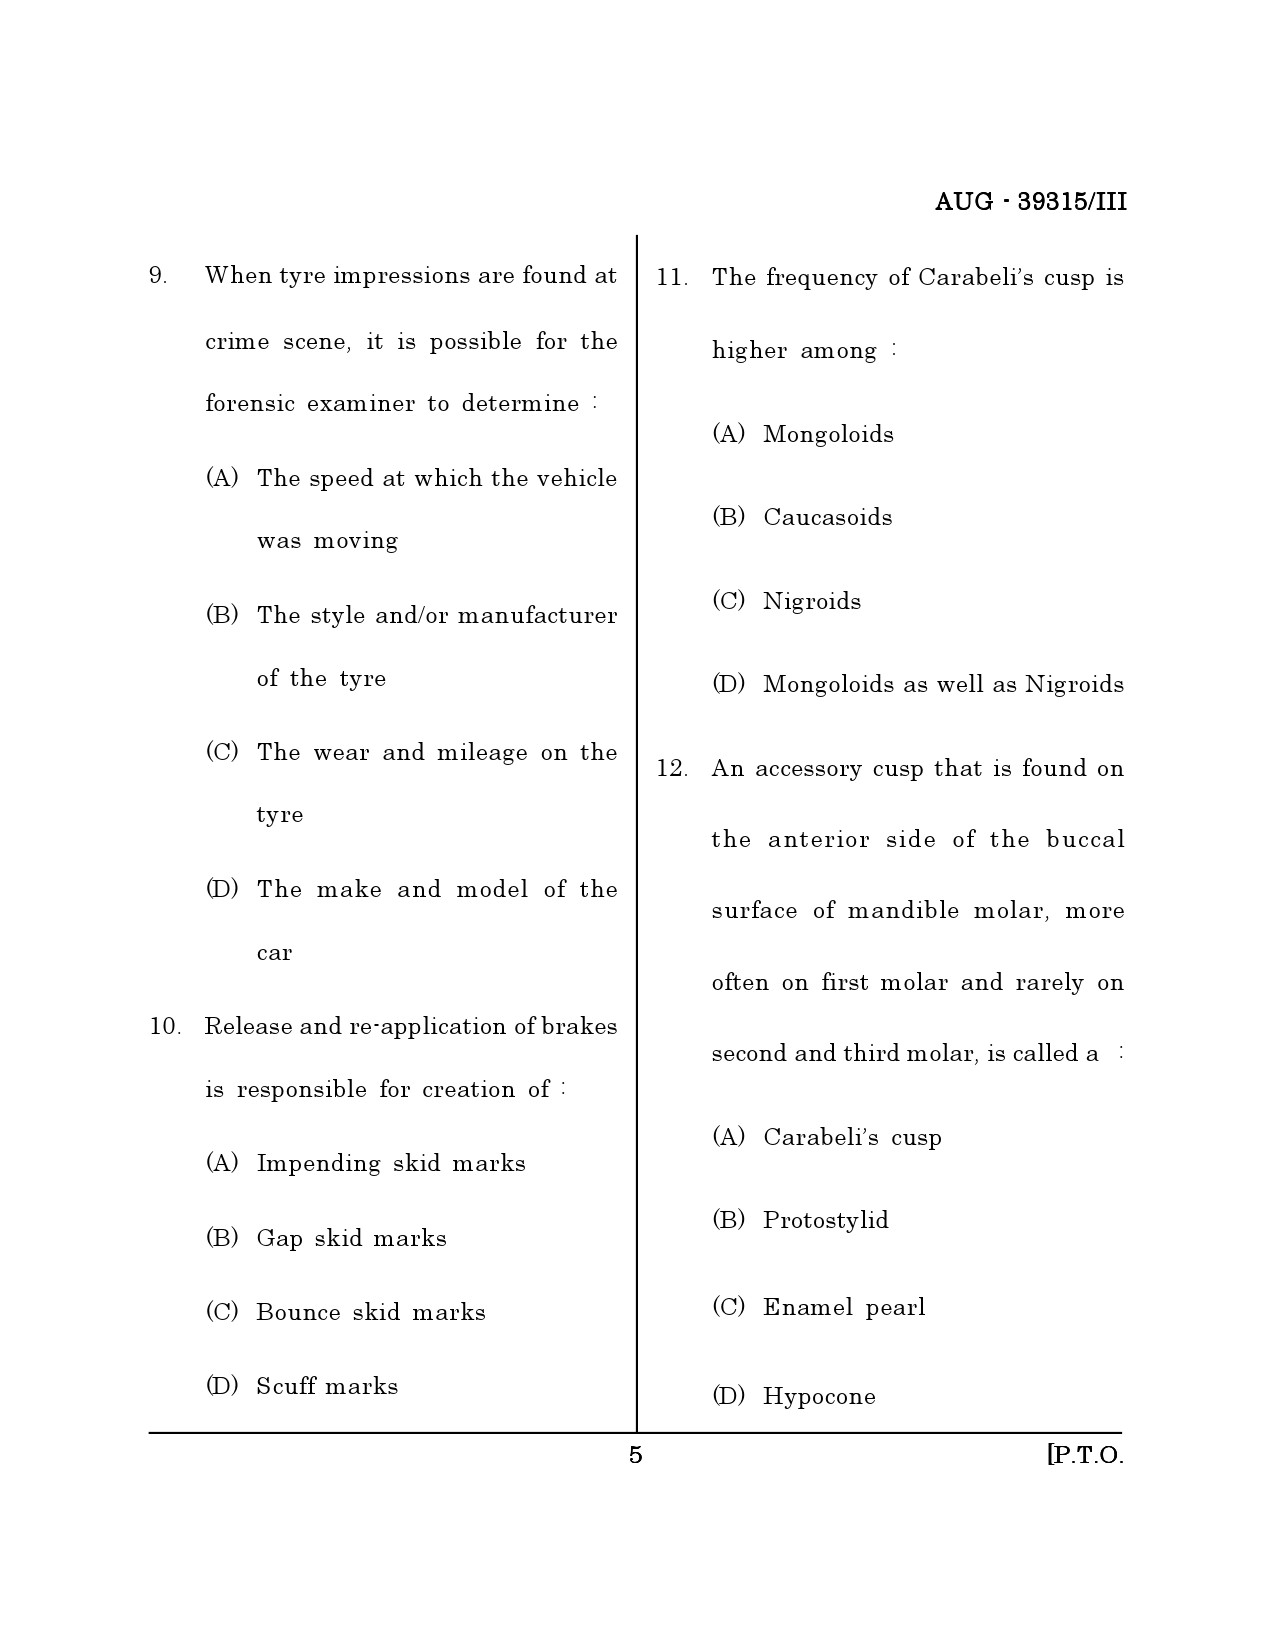 Maharashtra SET Forensic Science Question Paper III August 2015 4